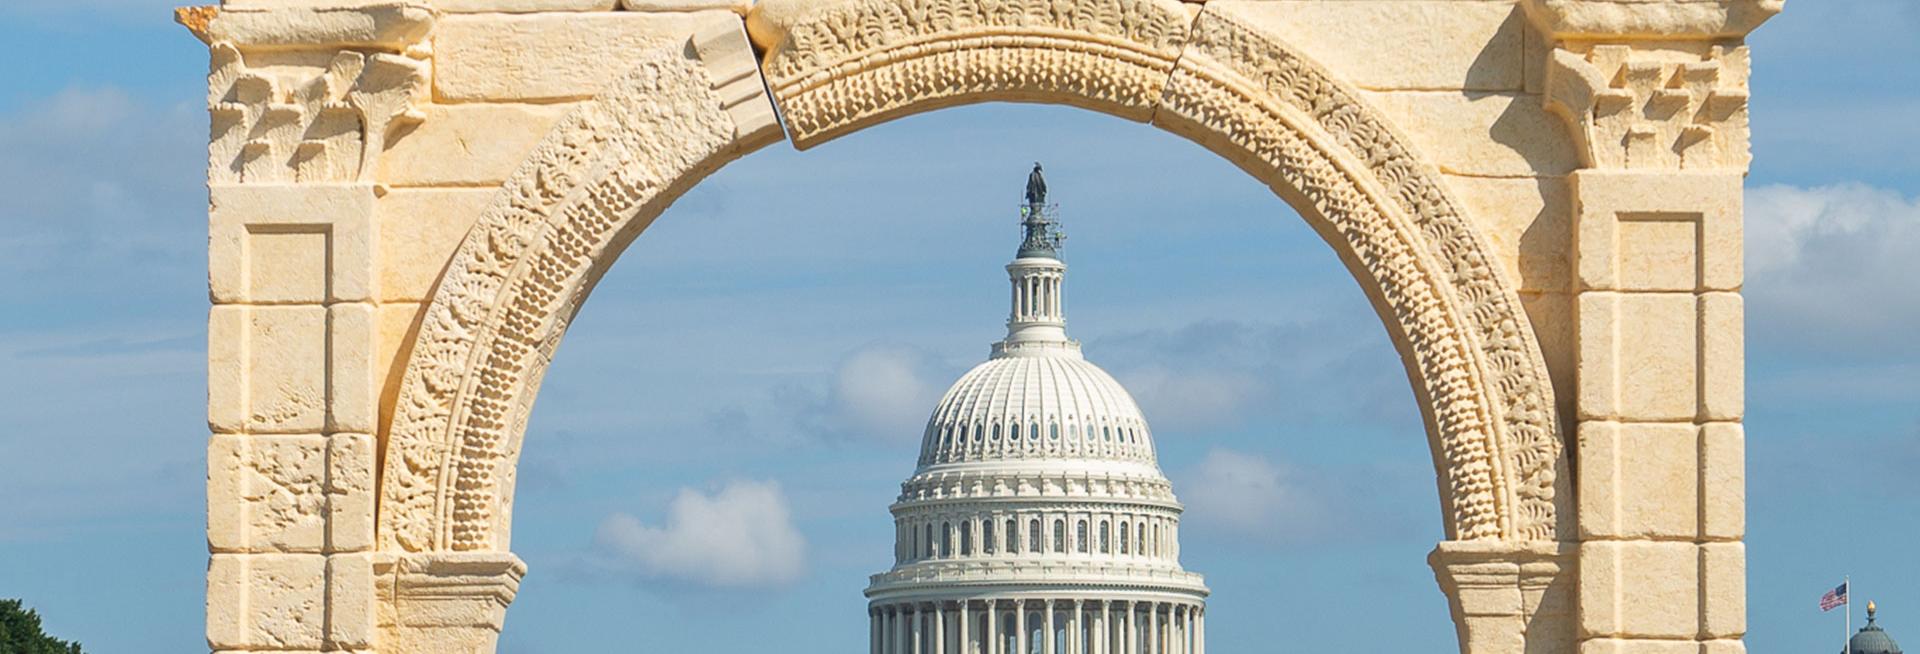 The reconstructed Palmyra arch framing the Capitol, Washington 